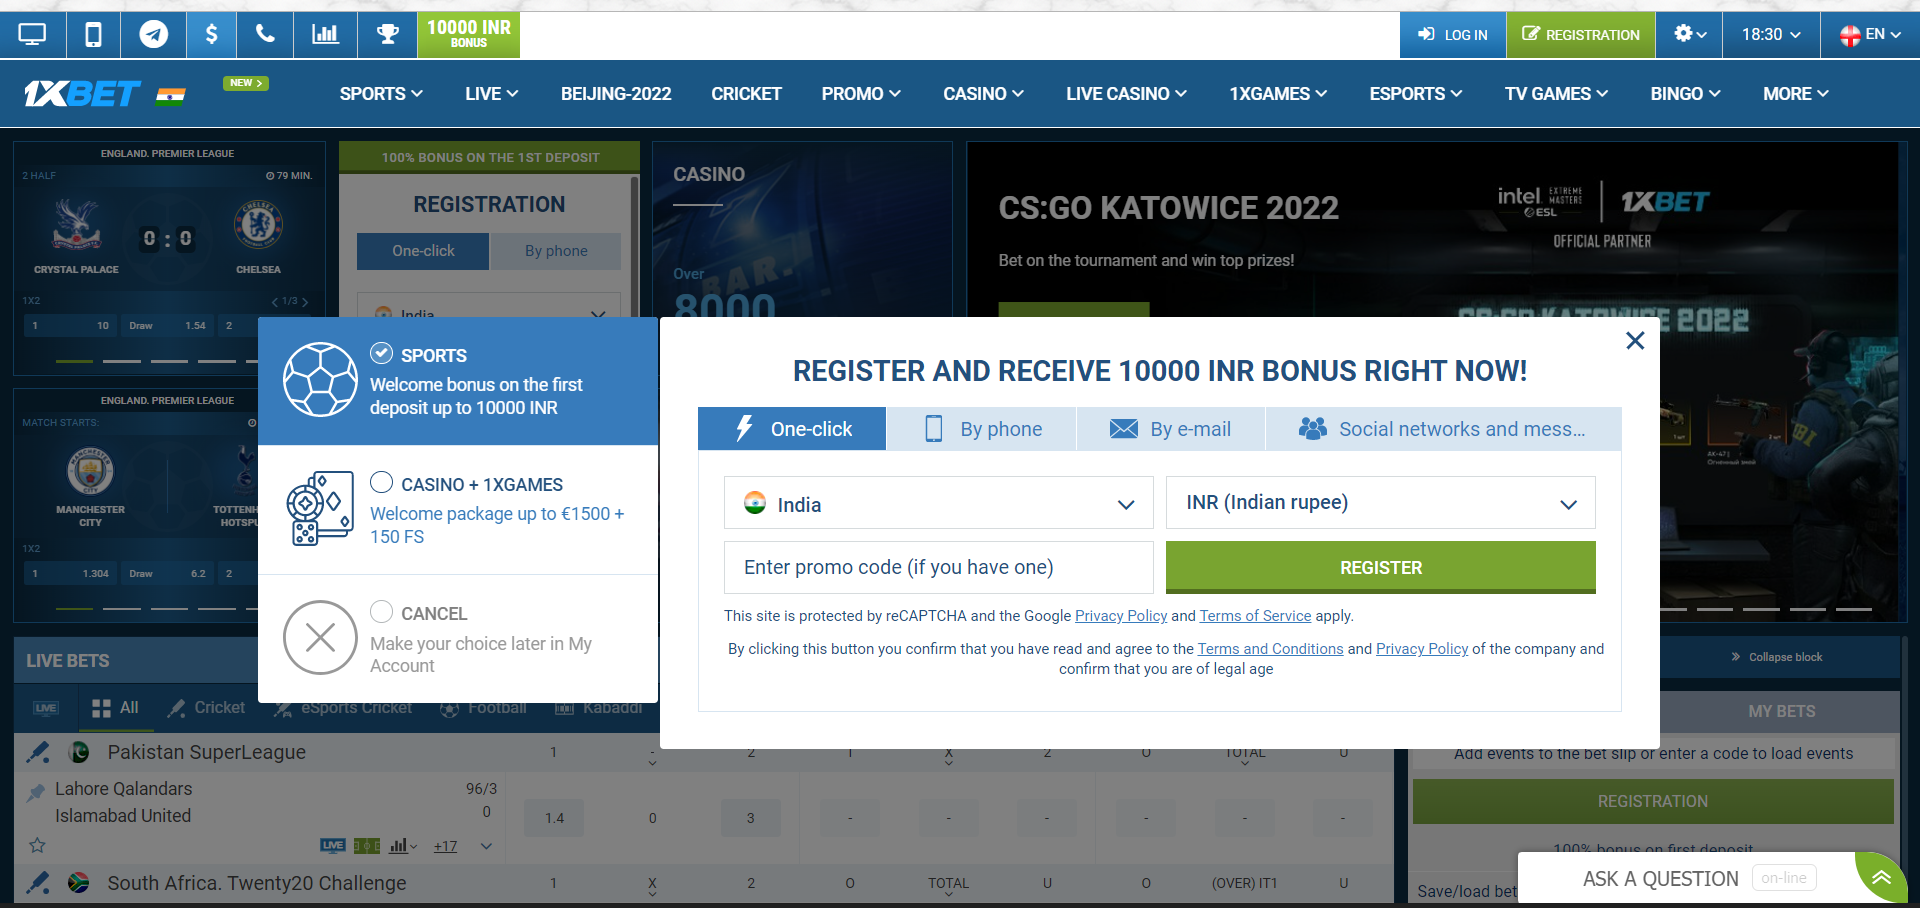 The page of 1xBet shows the box for registering on the website